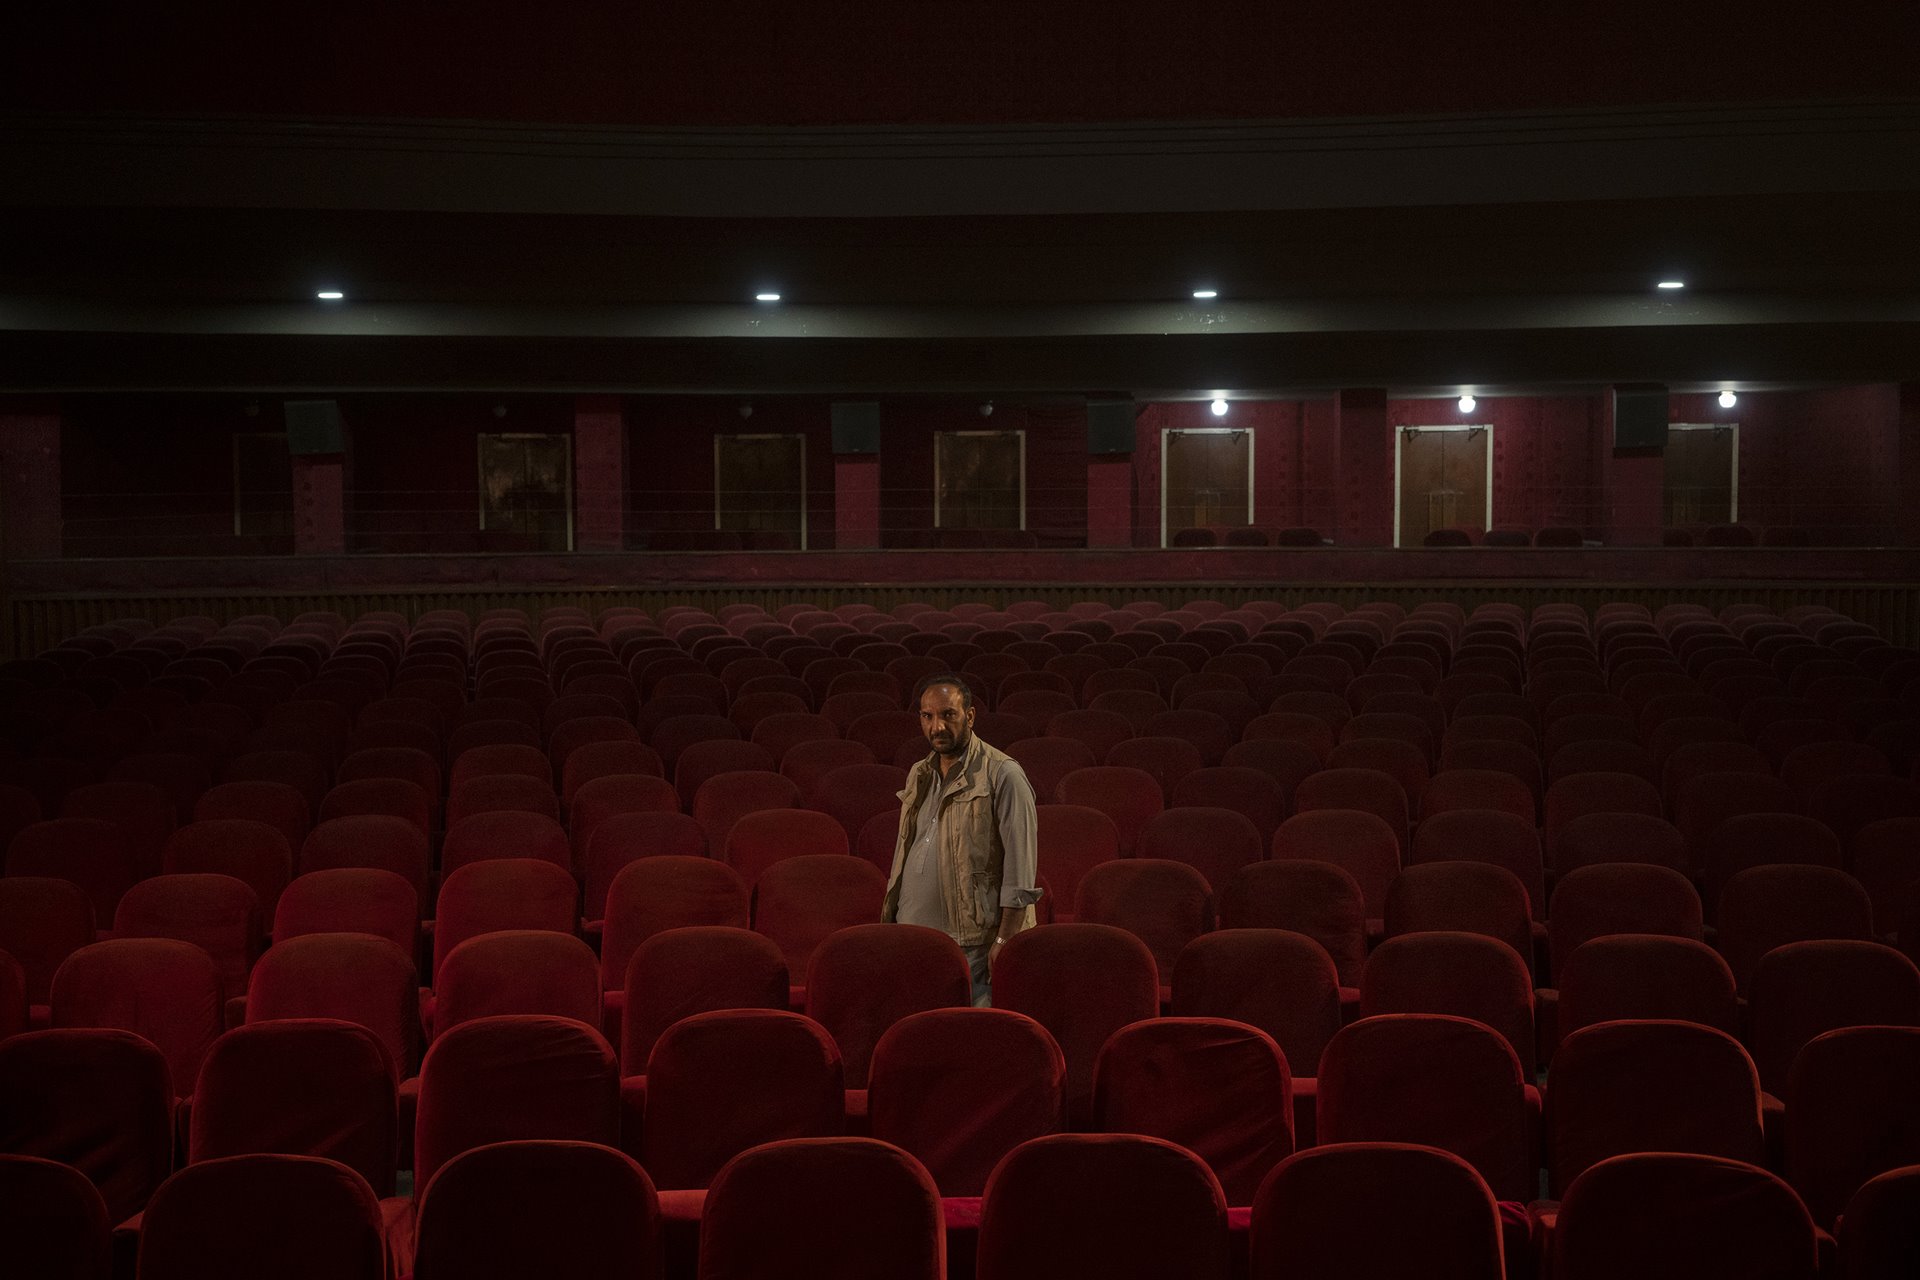 <p>Gul Mohammed, who works as an usher in the Ariana Cinema in Kabul, Afghanistan, poses for a photograph nearly three months after the Taliban closed the cinema.</p>
